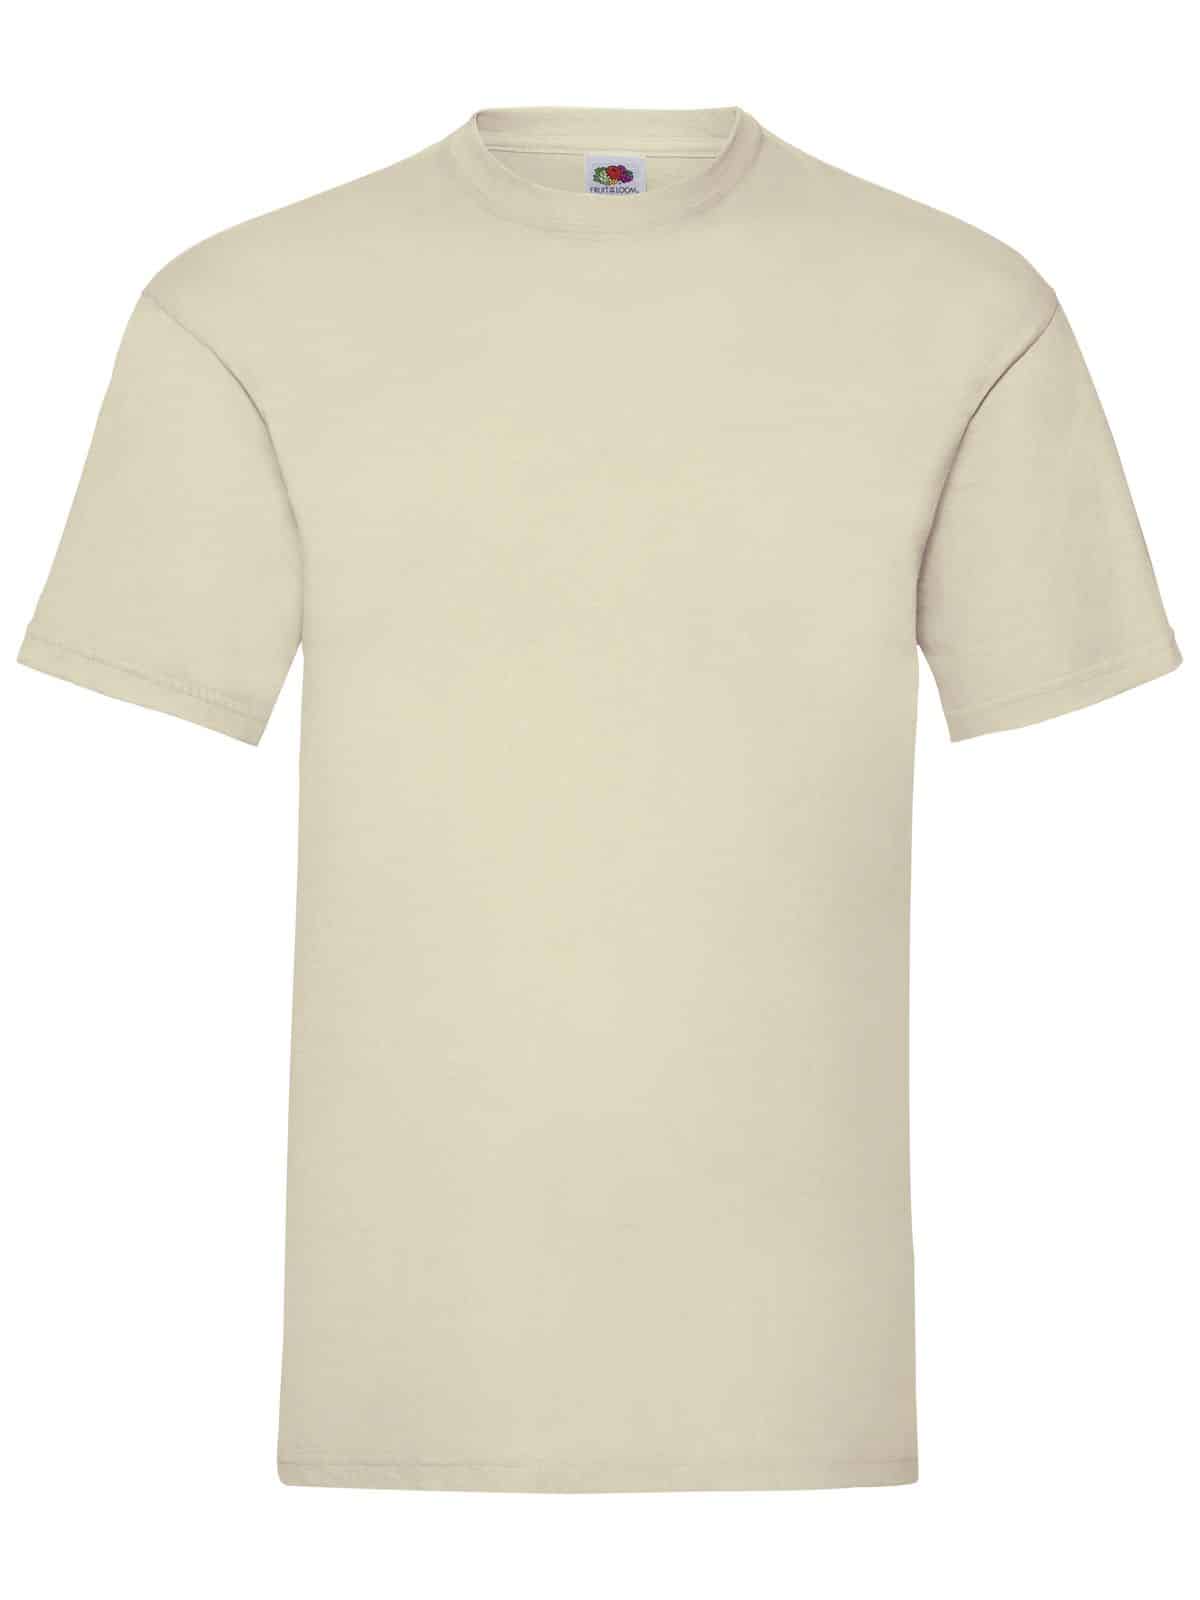 T-SHIRT MANICA CORTA | UOMO | BIANCA | FRUIT OF THE LOOM | VALUEWEIGHT T |  100% COTONE | 165 gr/m2 | FR610360 NATURAL - Dandy Company